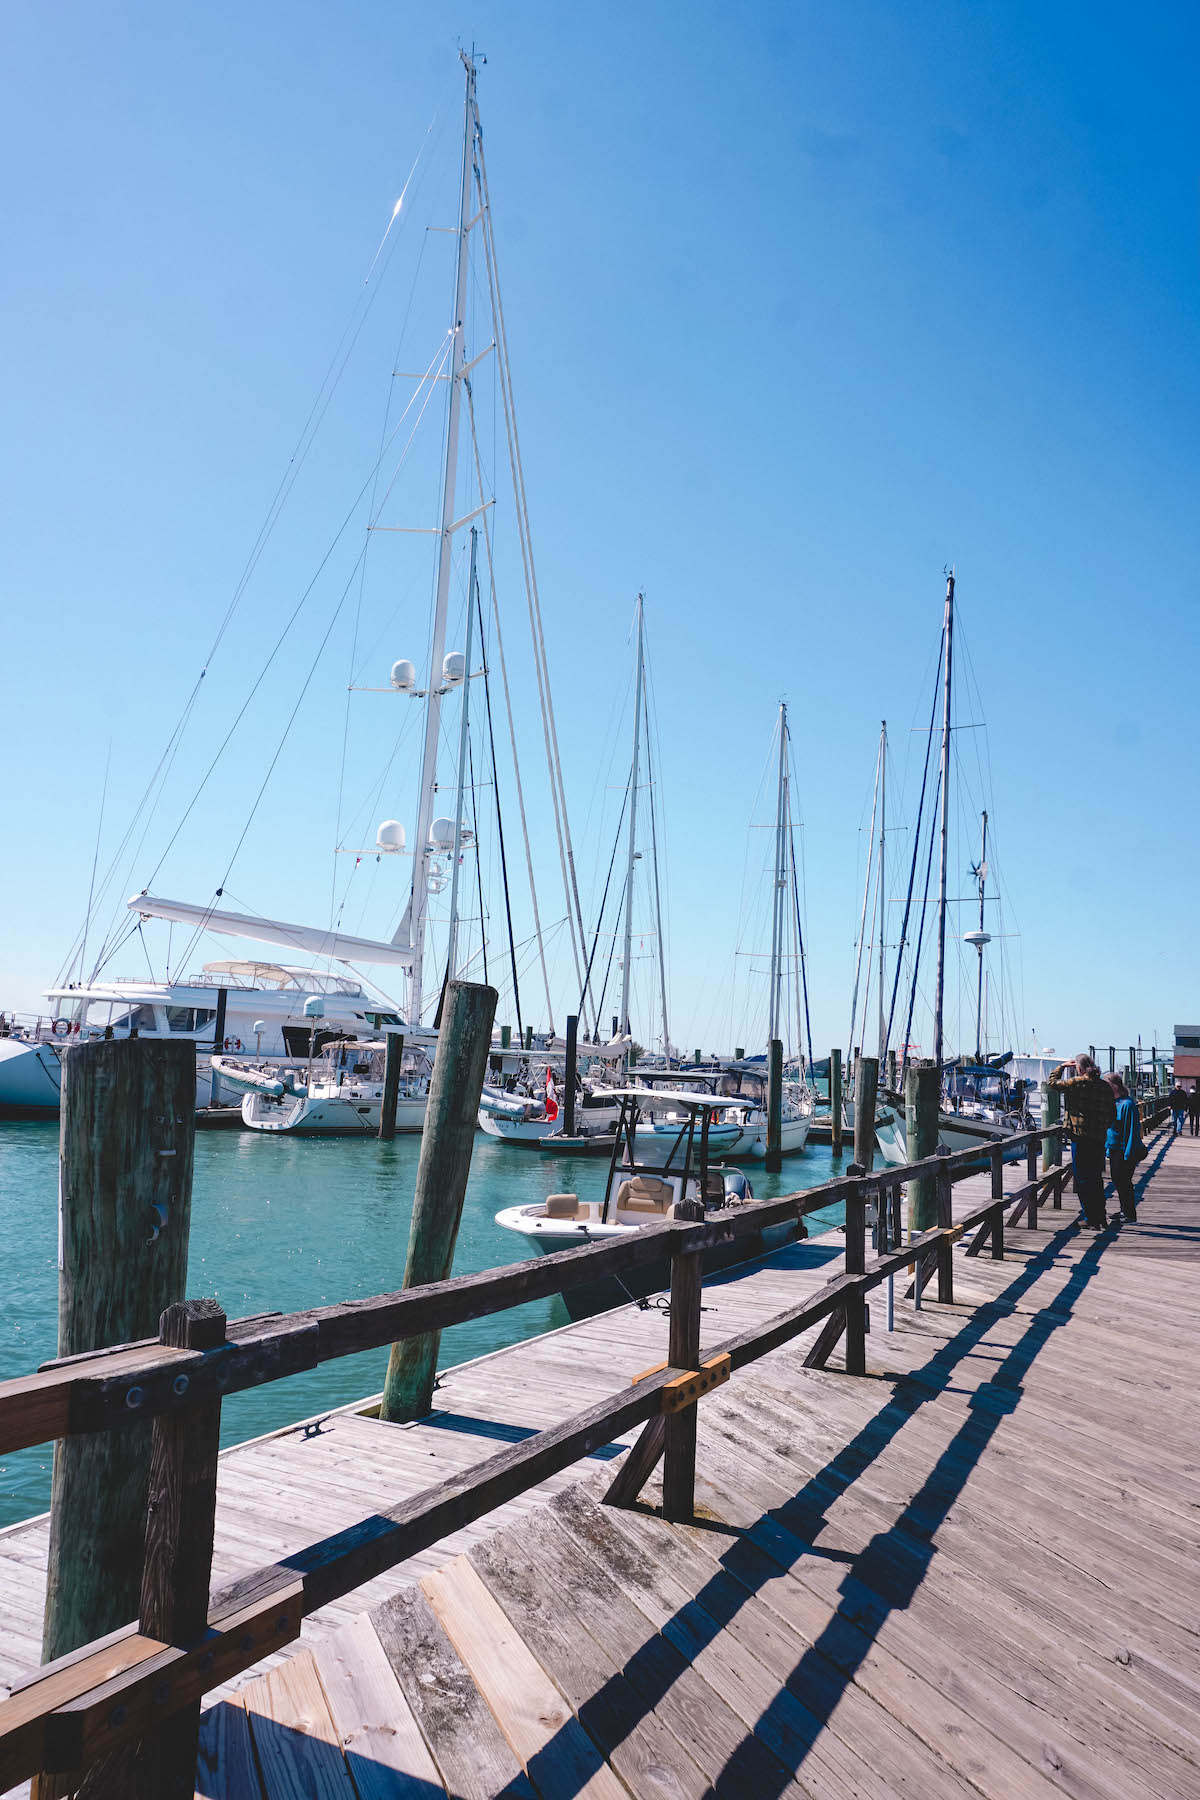 The marina in Beaufort, NC on a sunny day.